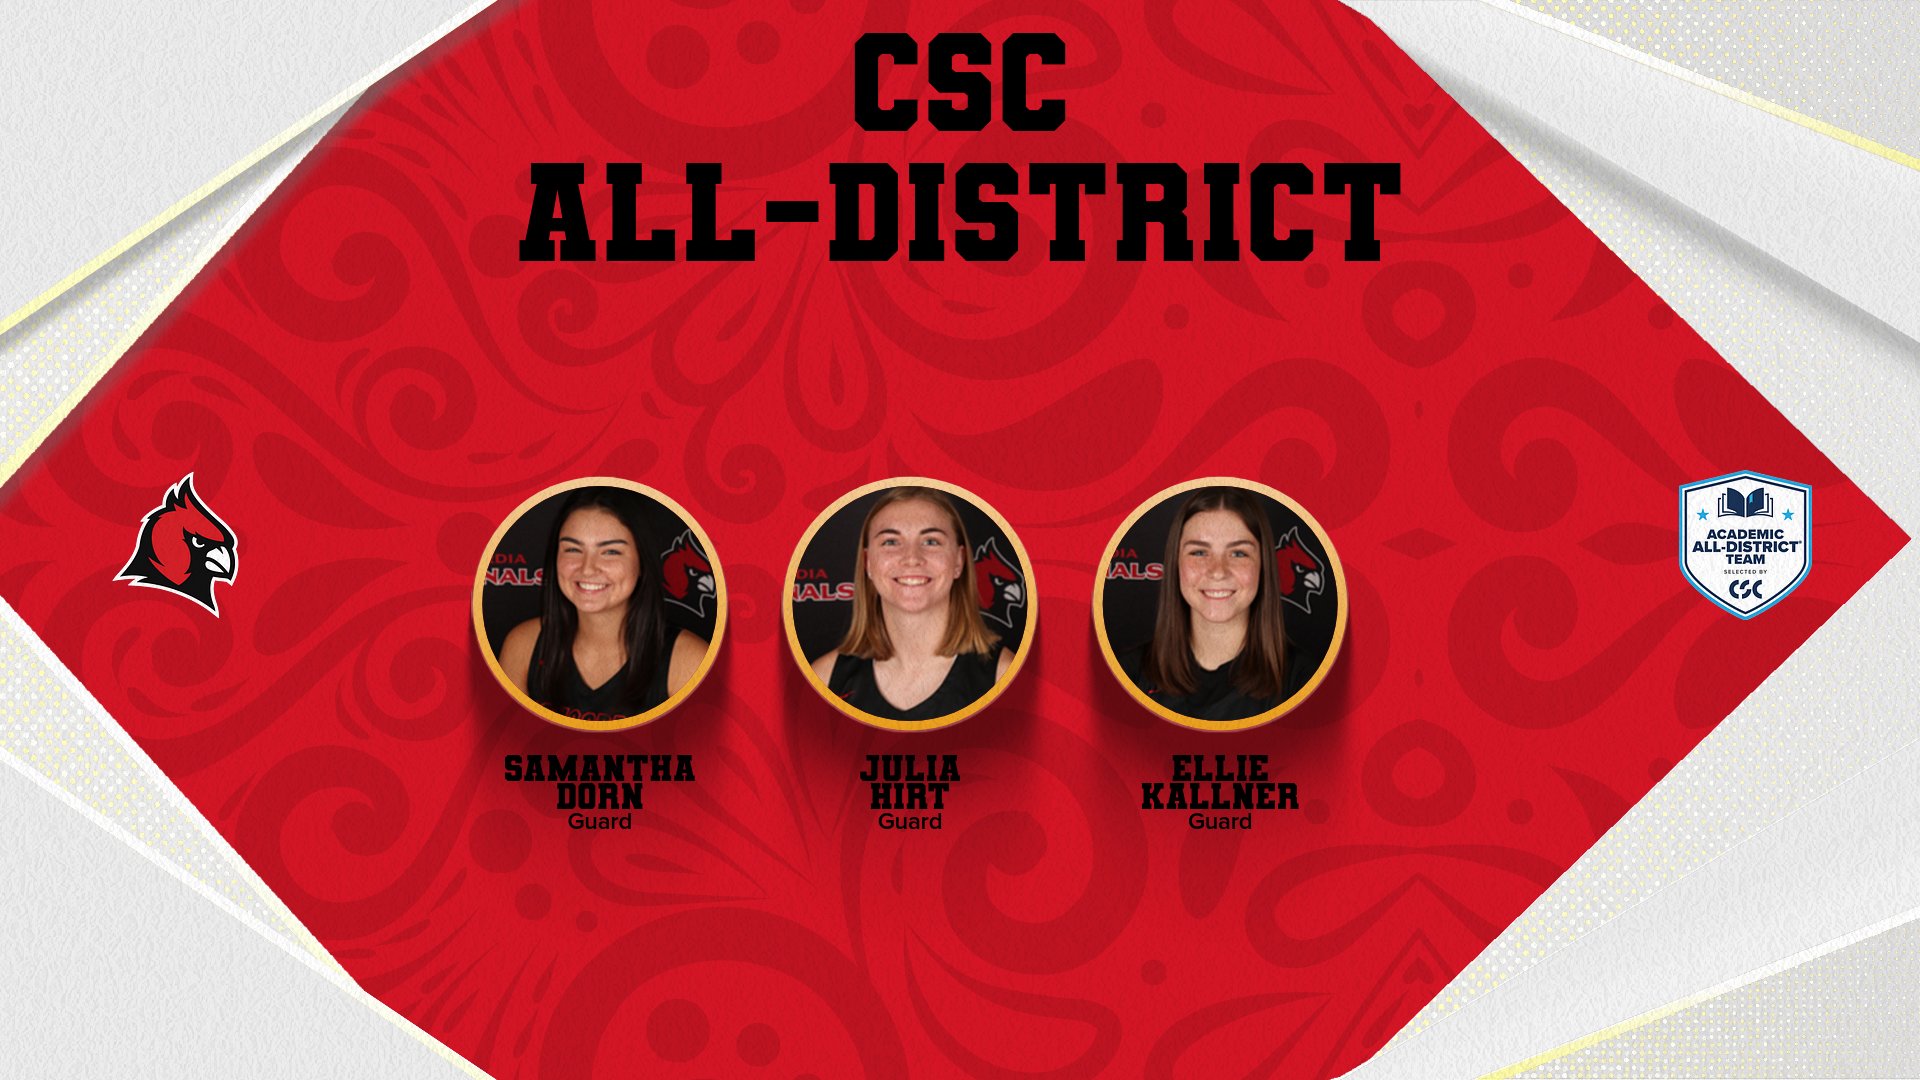 Three Women's Basketball players named to CSC All-District Team